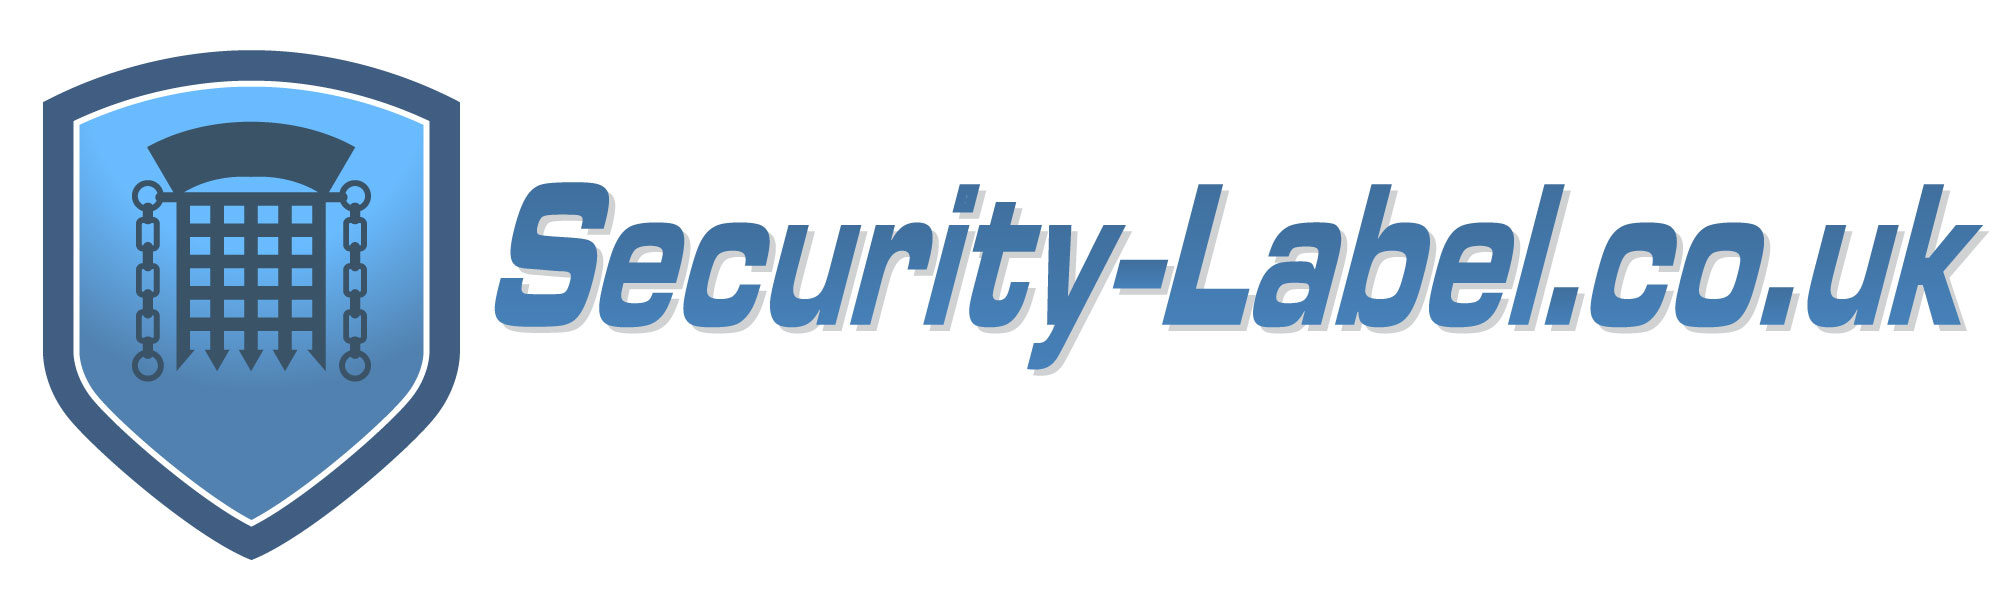 Security-label.co.uk